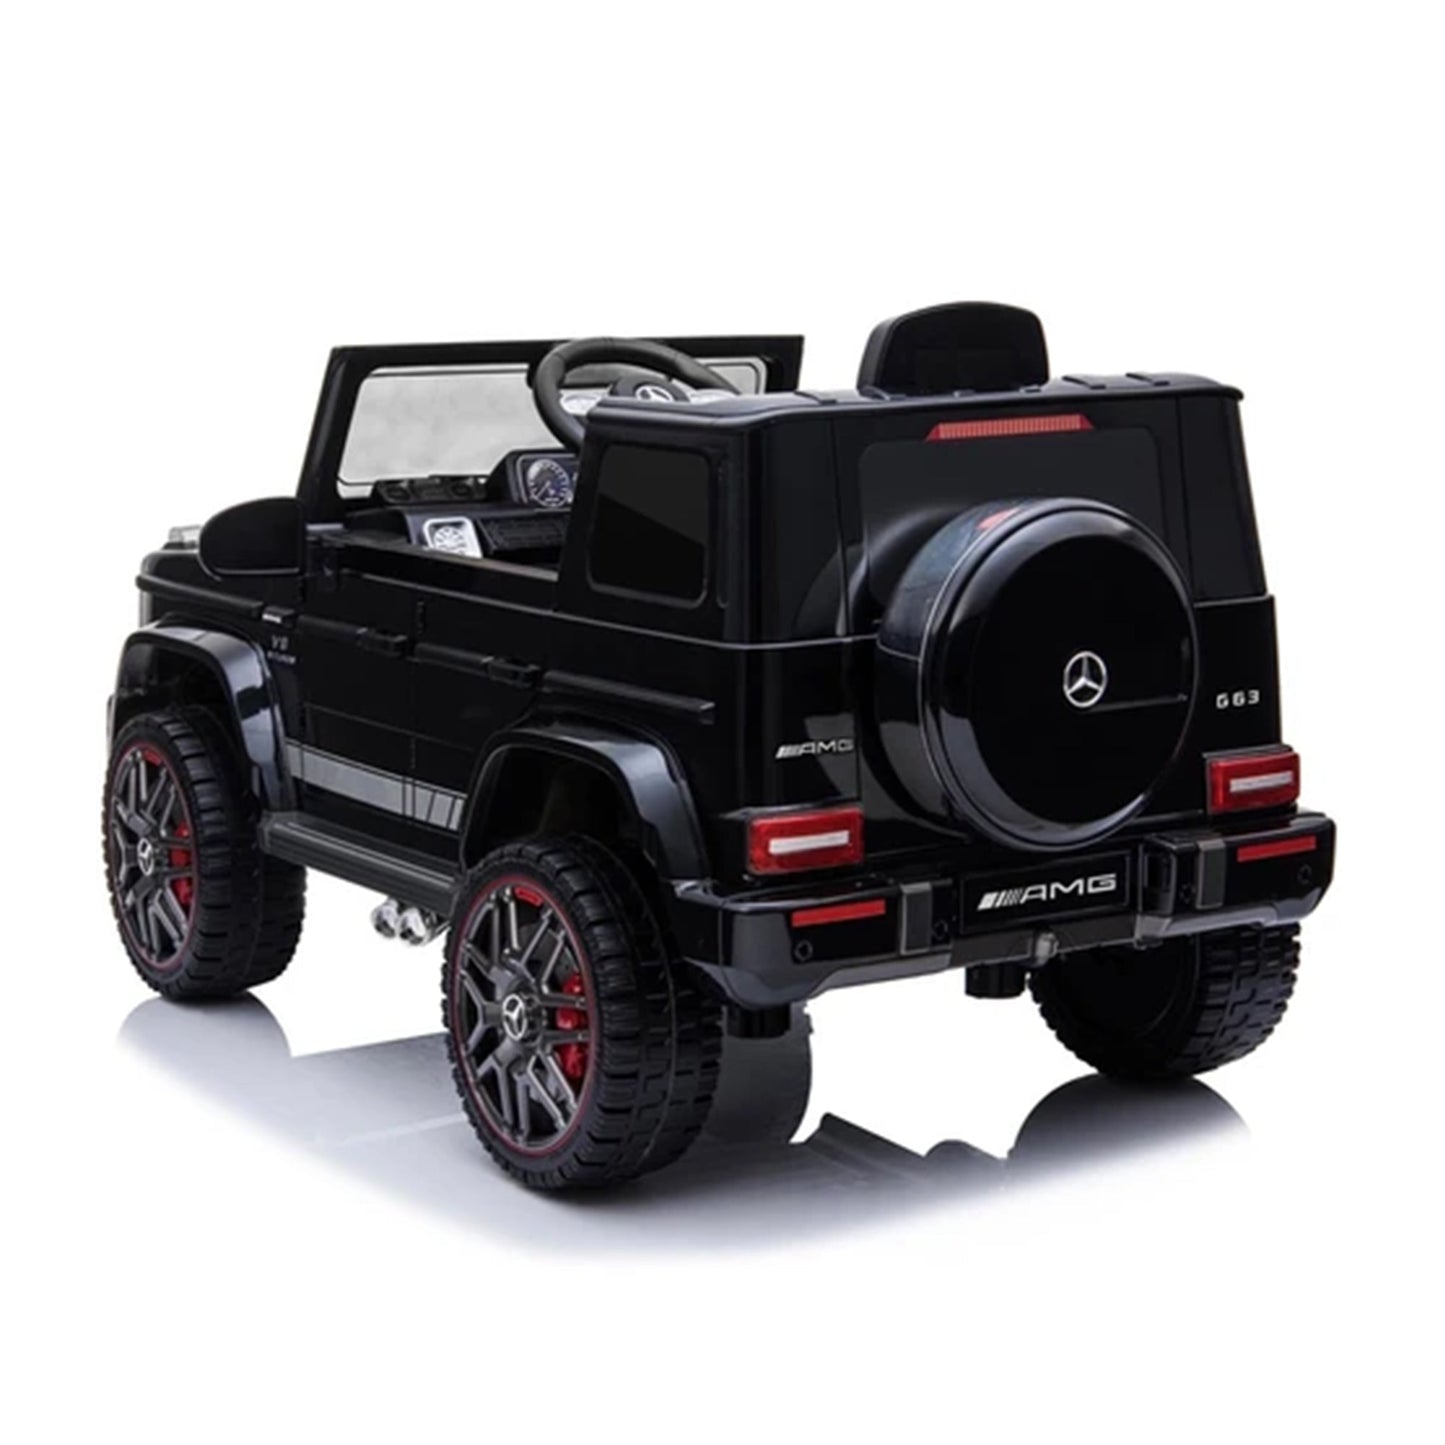 Black Mercedes G63 AMG electric ride-on car for children on a white background